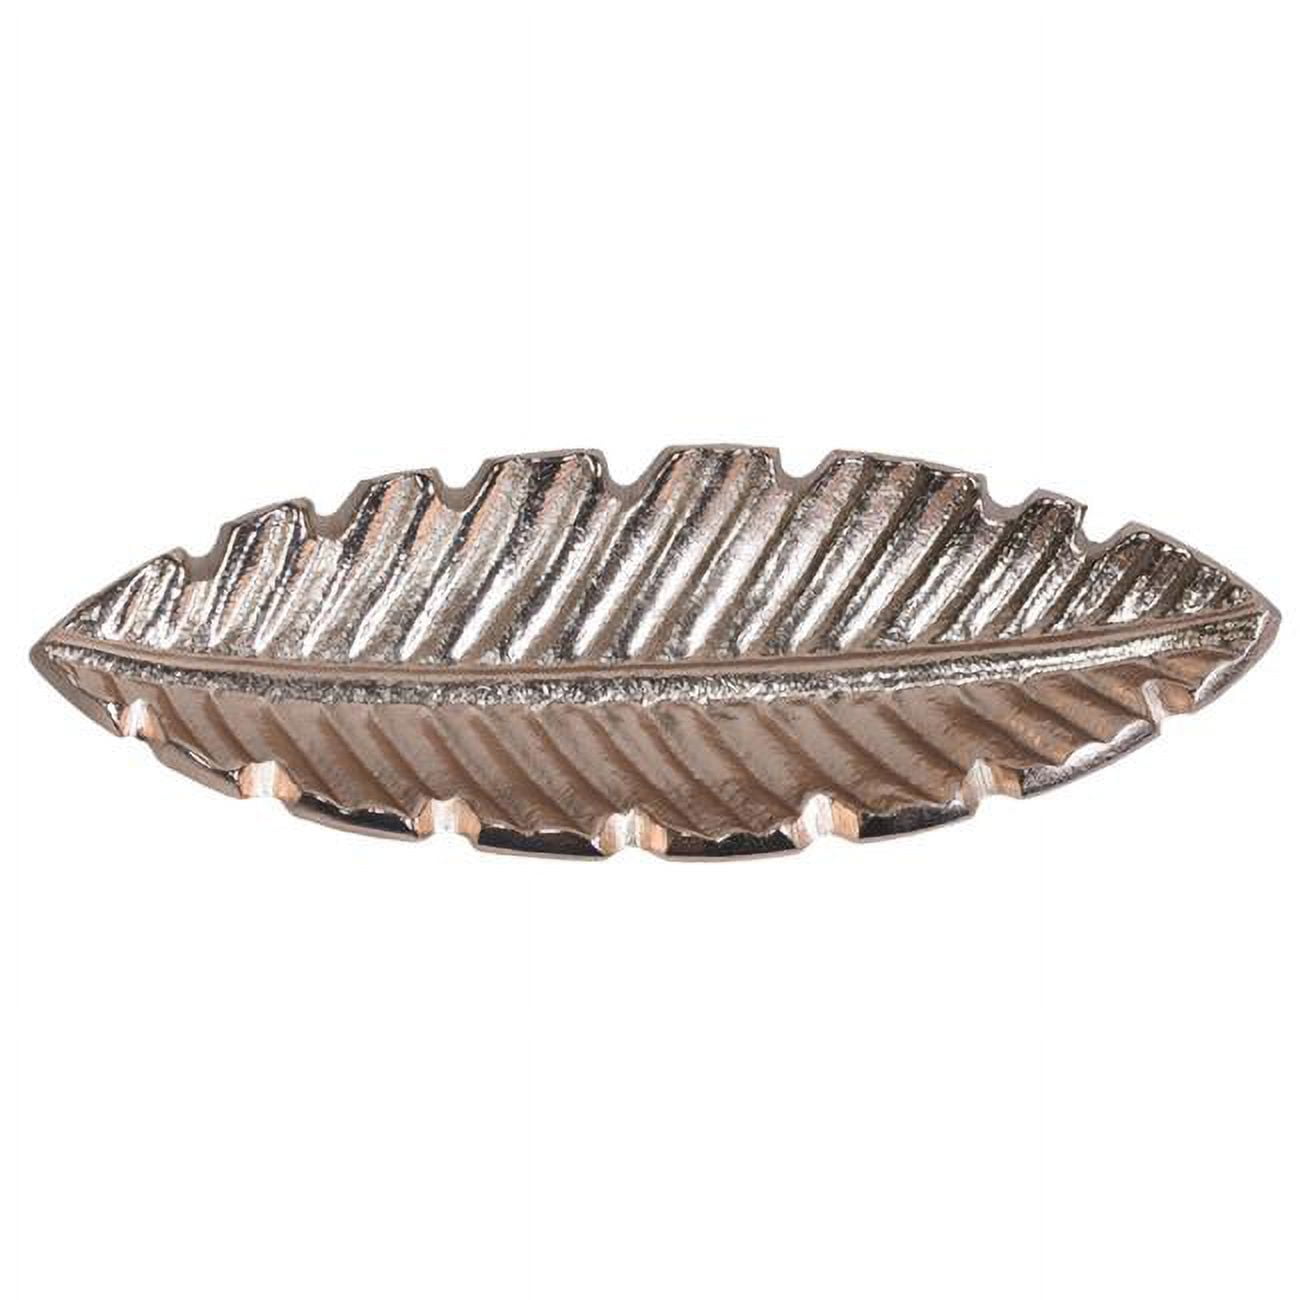 Picture of BBH Homes UBBBVK040AB2020SC3HS 7.28 x 2.36 x 0.78 in. Handmade Bronze Coated Decorative Aluminum Tray